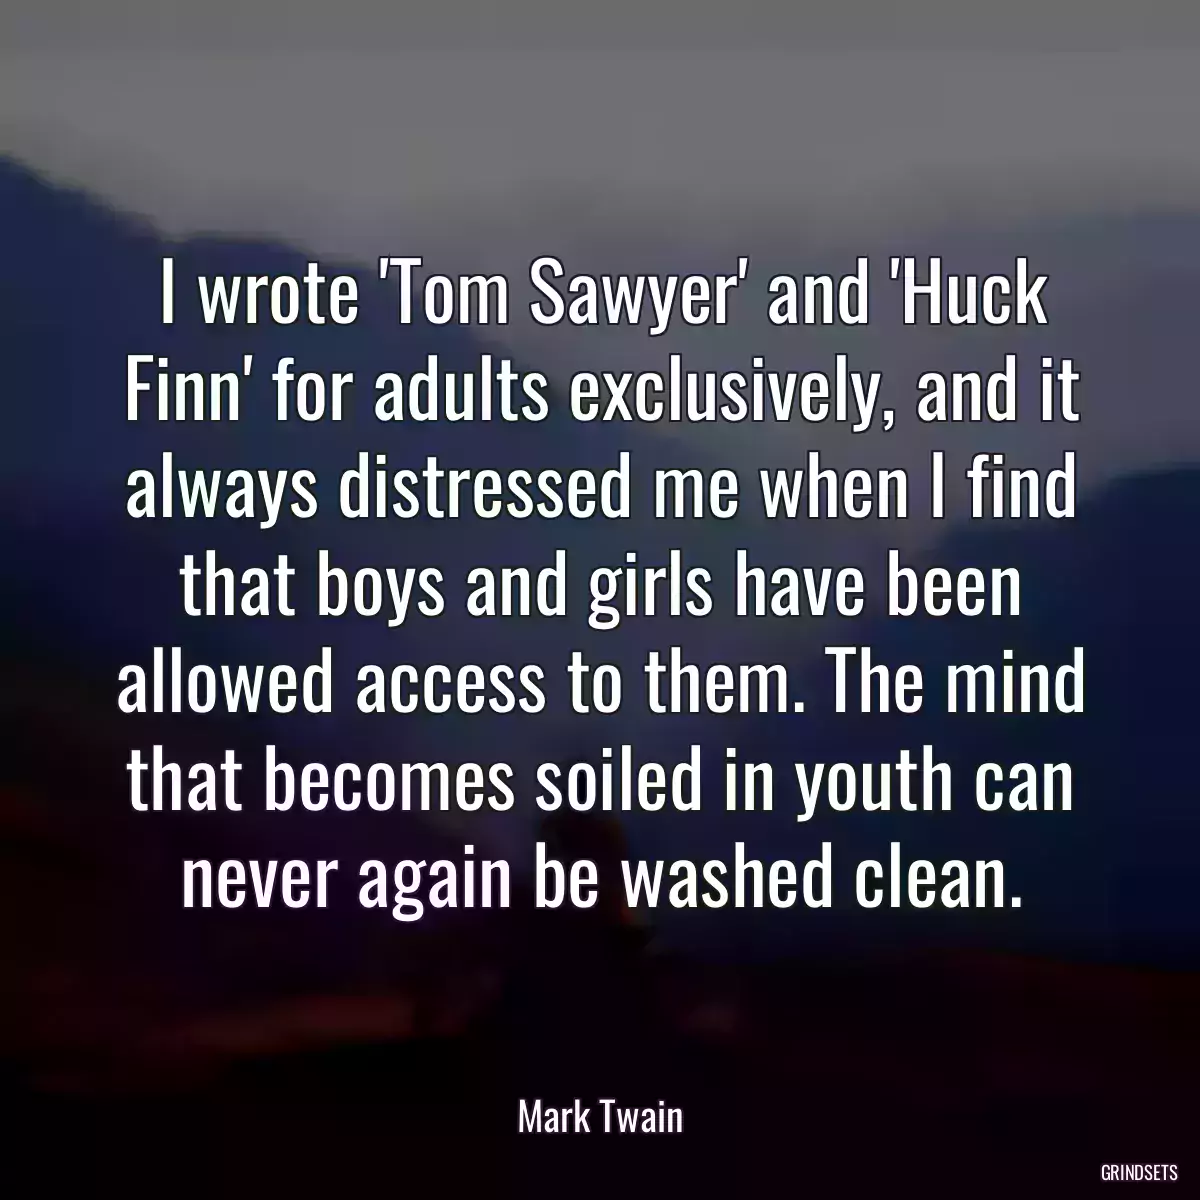 I wrote \'Tom Sawyer\' and \'Huck Finn\' for adults exclusively, and it always distressed me when I find that boys and girls have been allowed access to them. The mind that becomes soiled in youth can never again be washed clean.